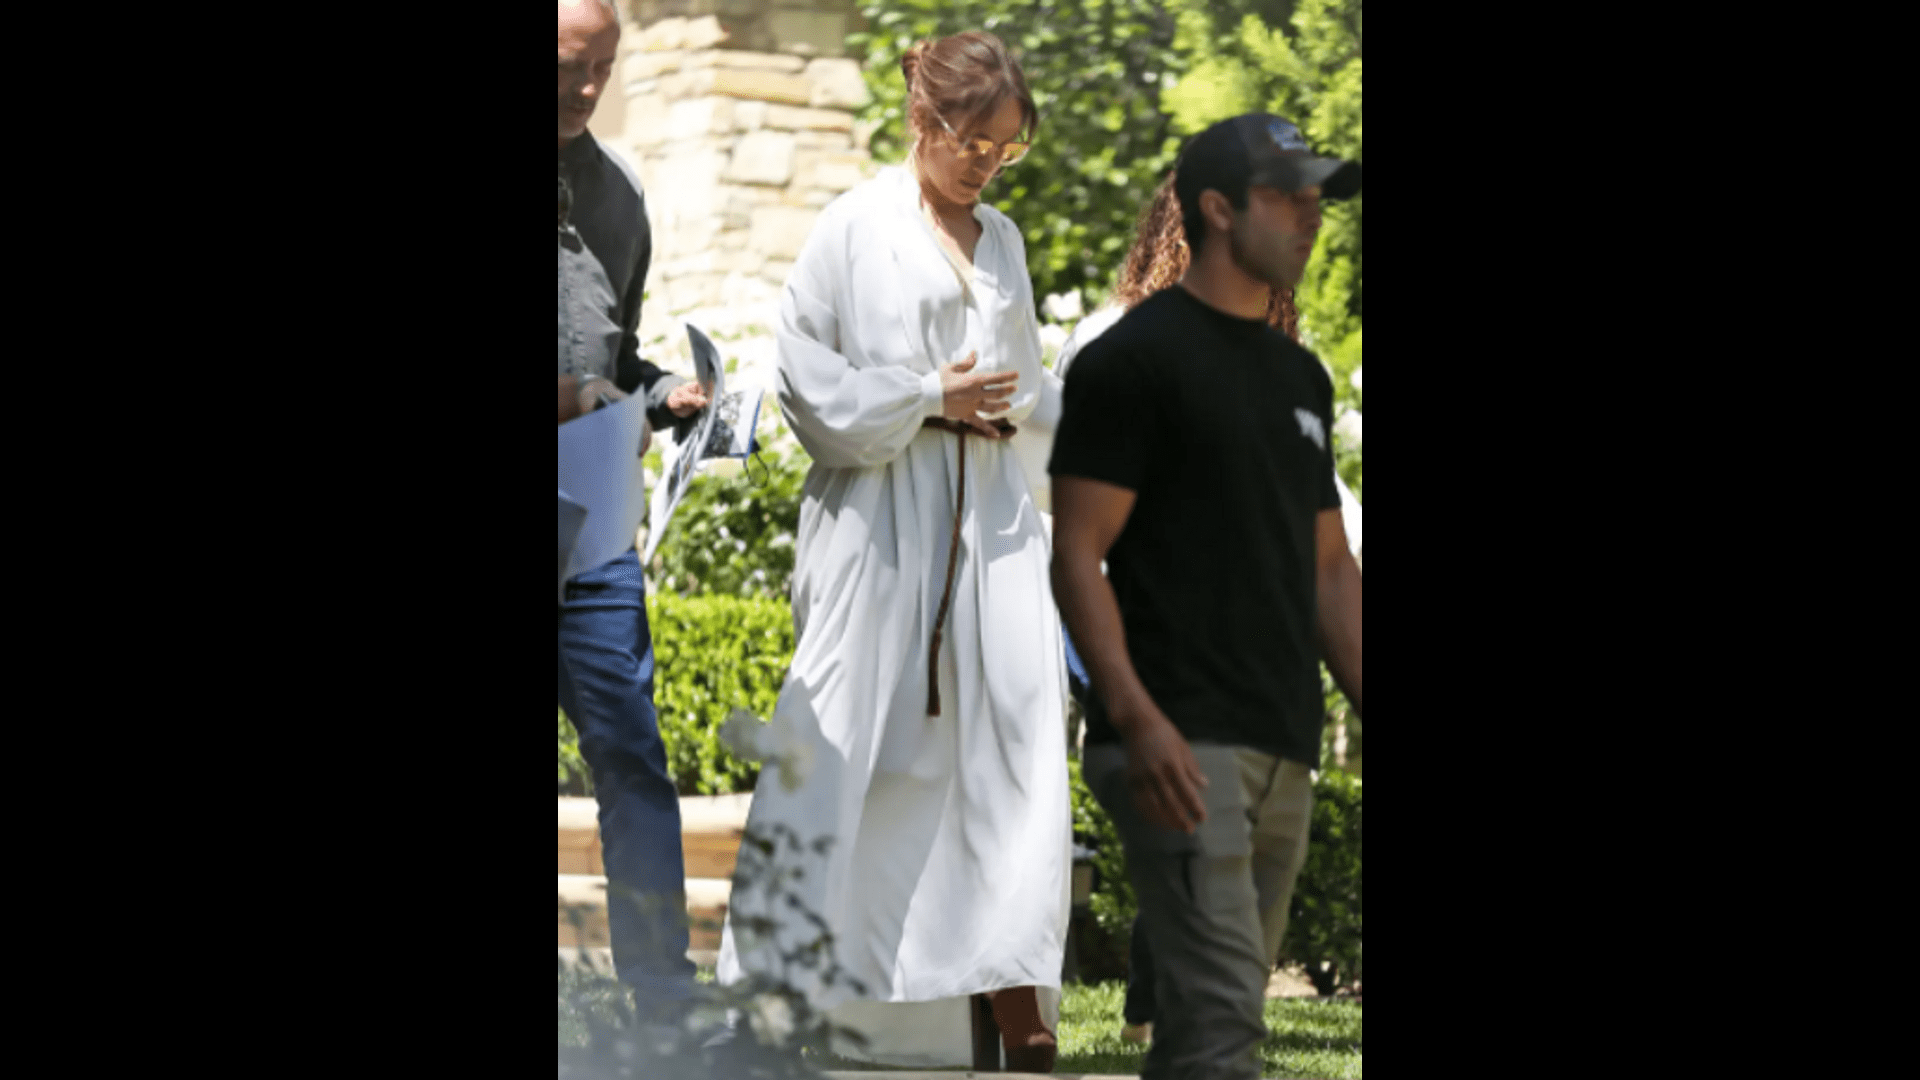 ”jennifer-lopez-showed-off-the-perfect-white-dress-for-warm-days”